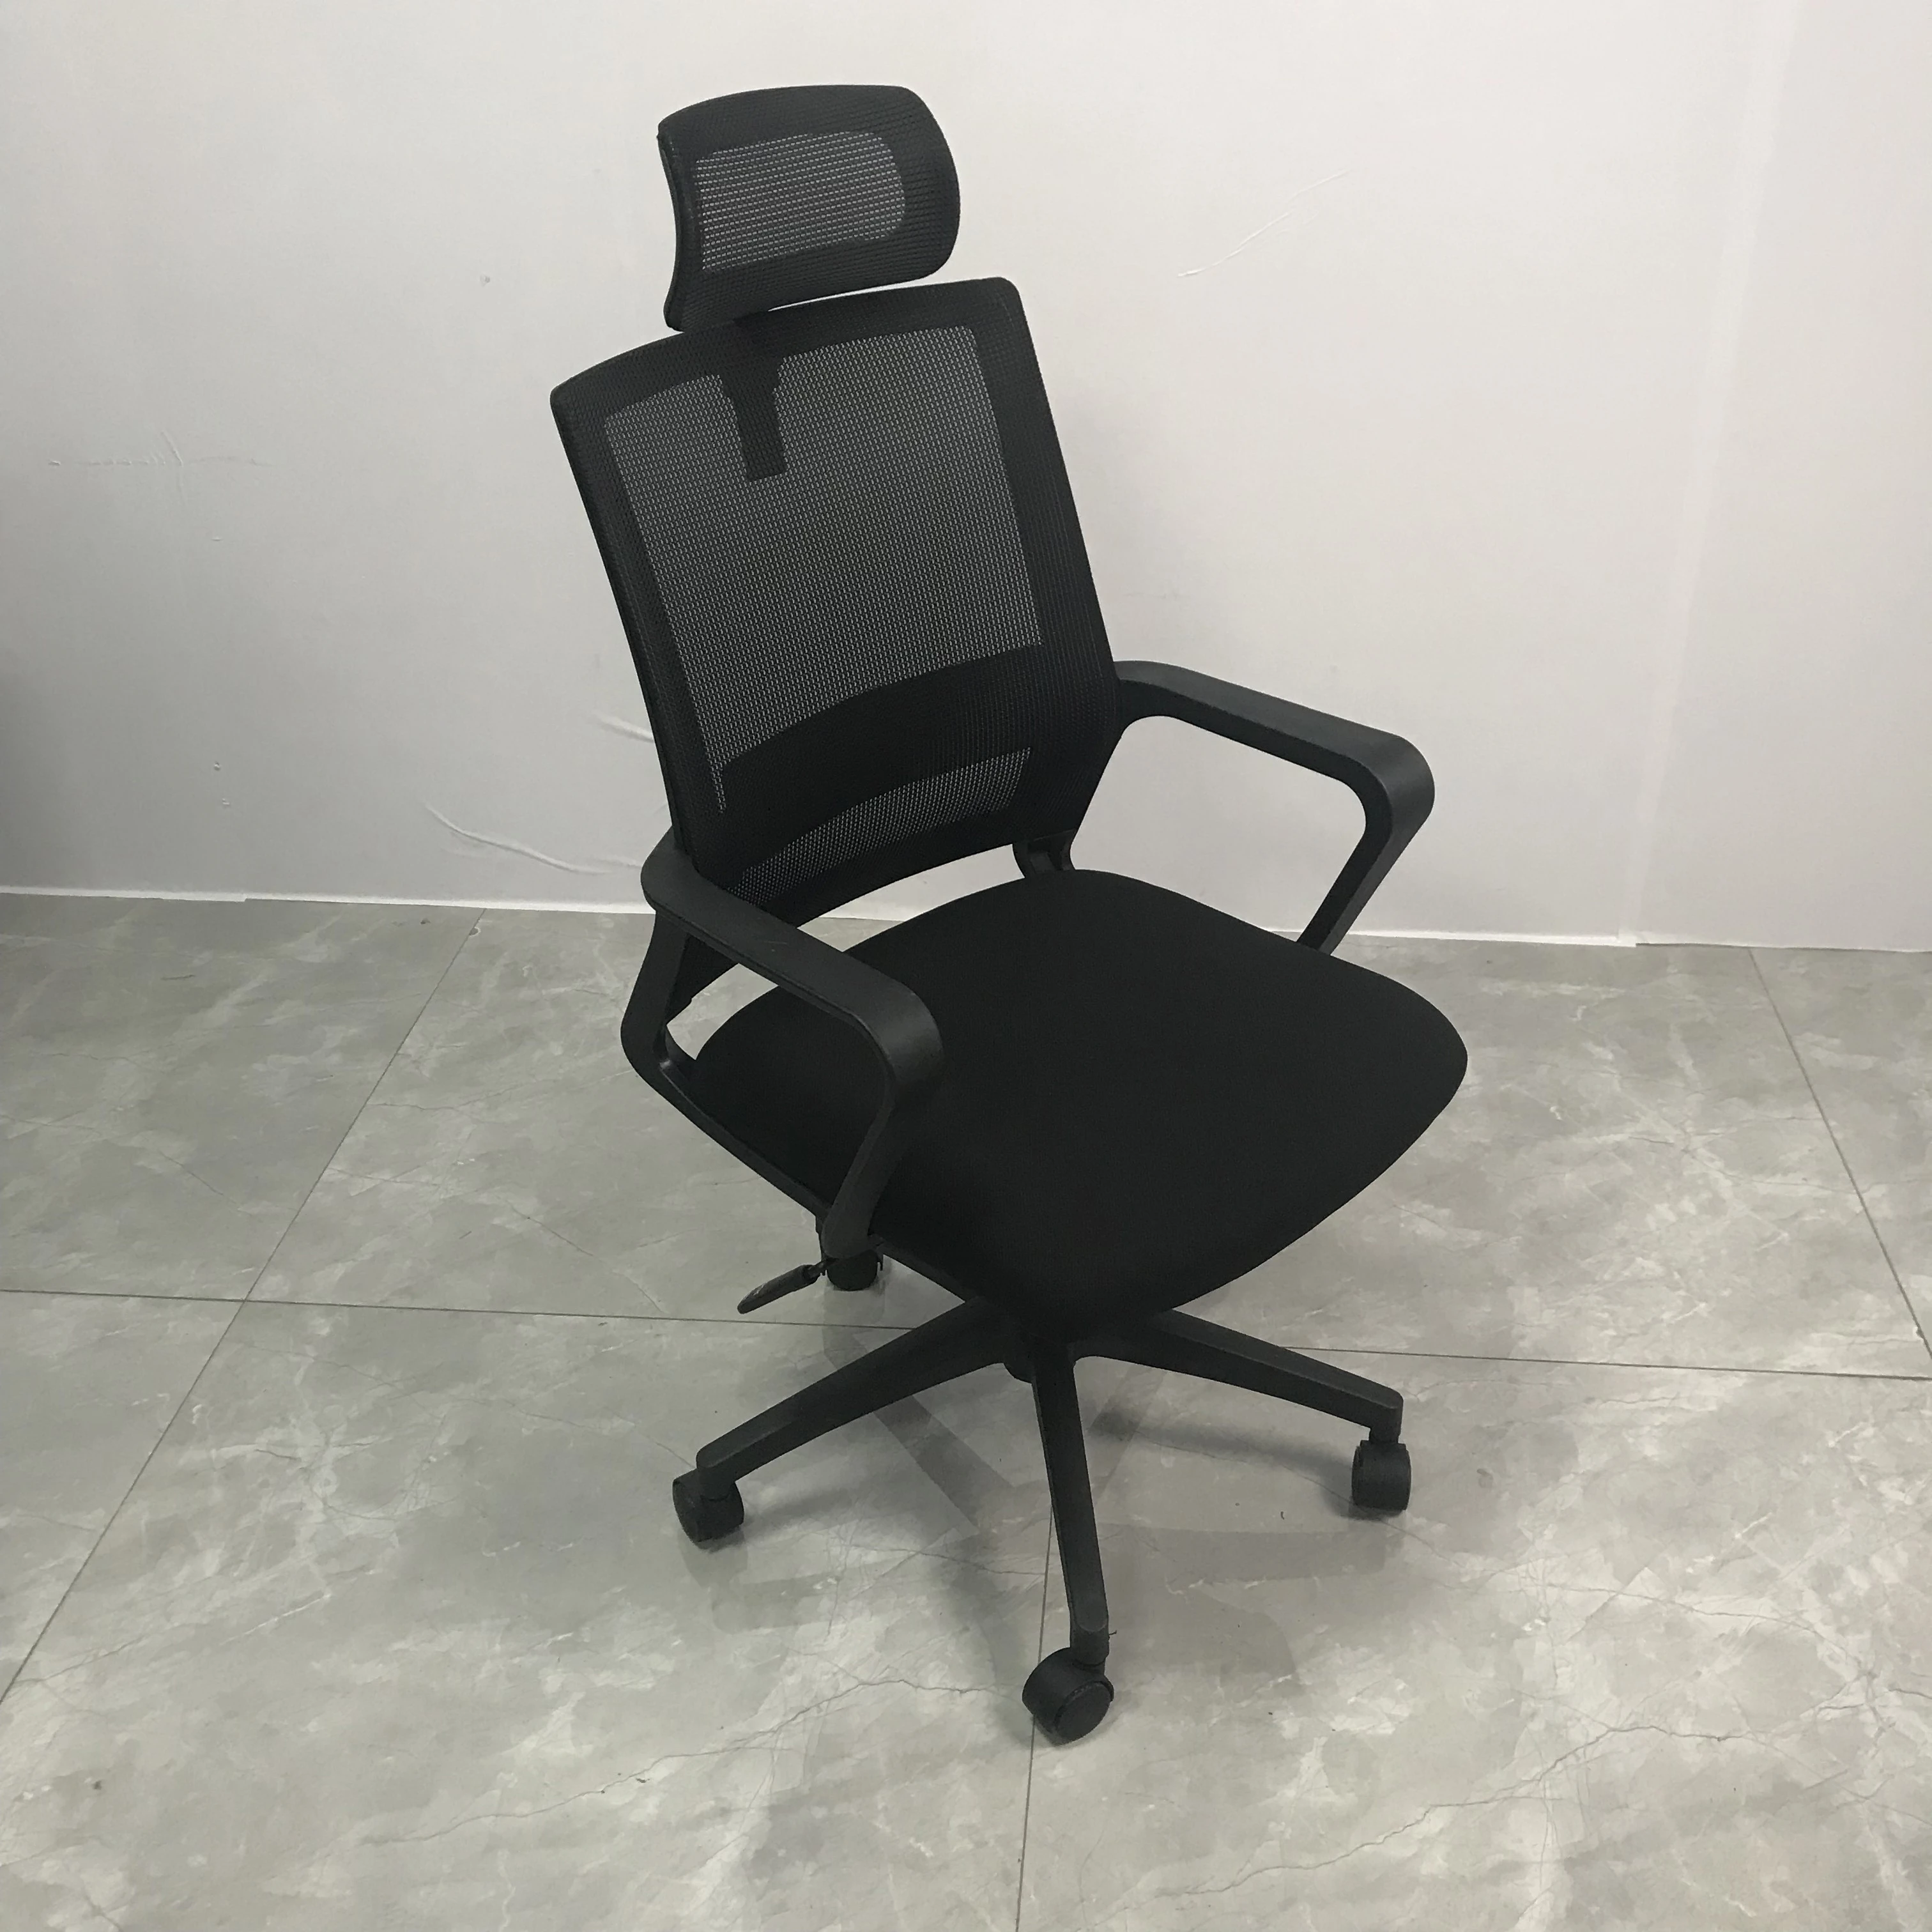 Amazon Bess high quality mesh chair mesh chair with nylon leg office chair with head pillow